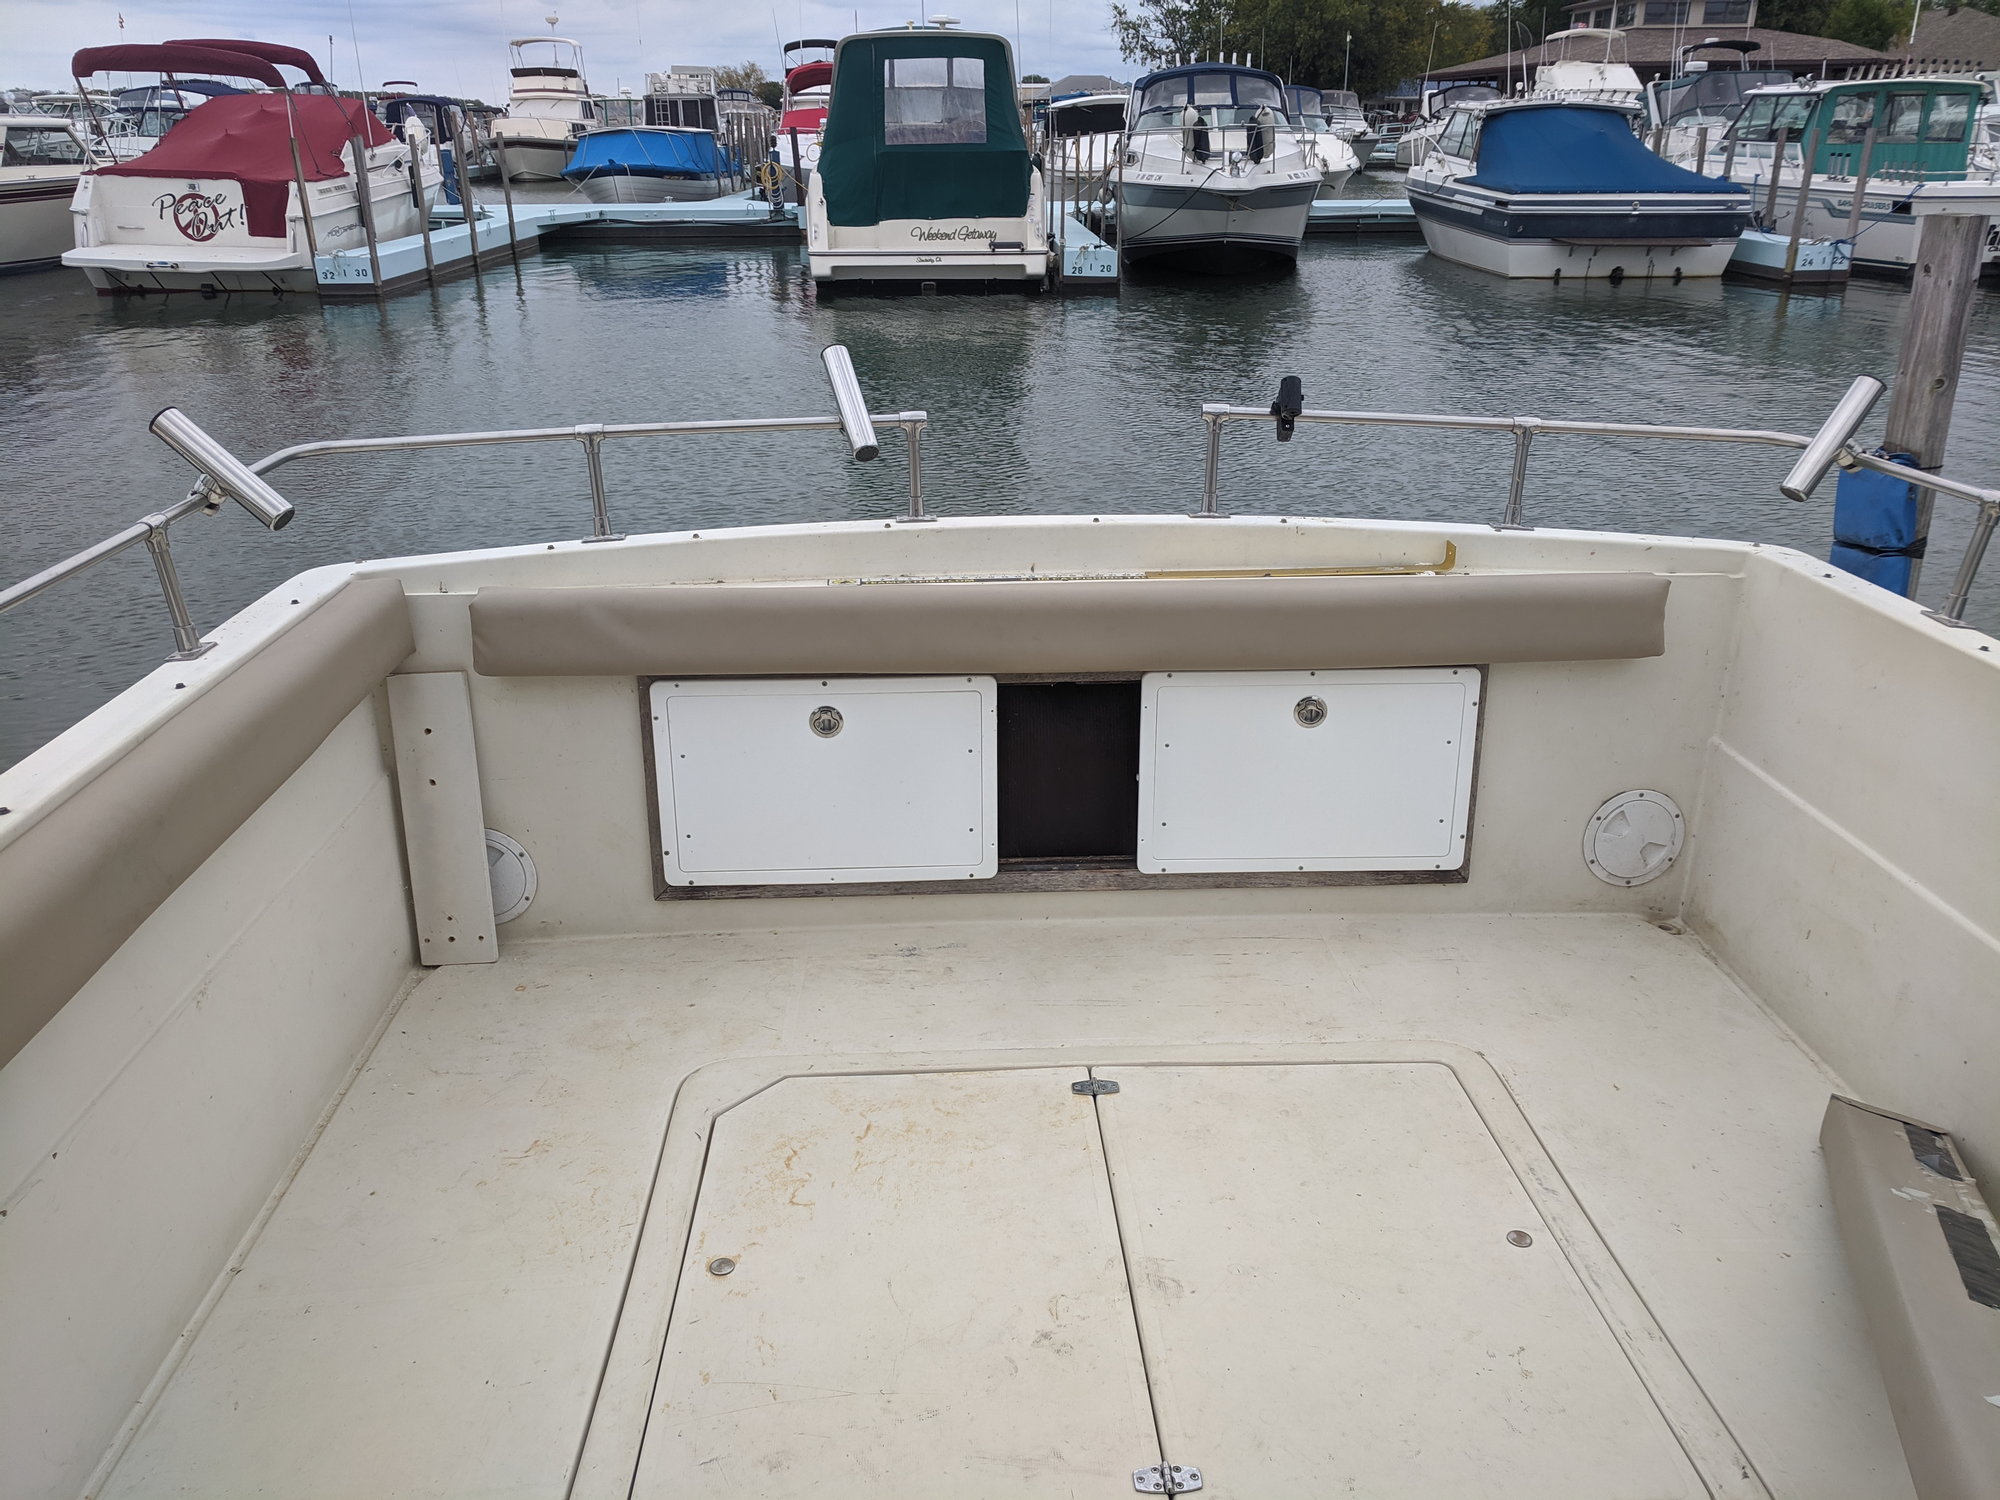 Can I mount pedestal seats on these hatch covers? - The Hull Truth